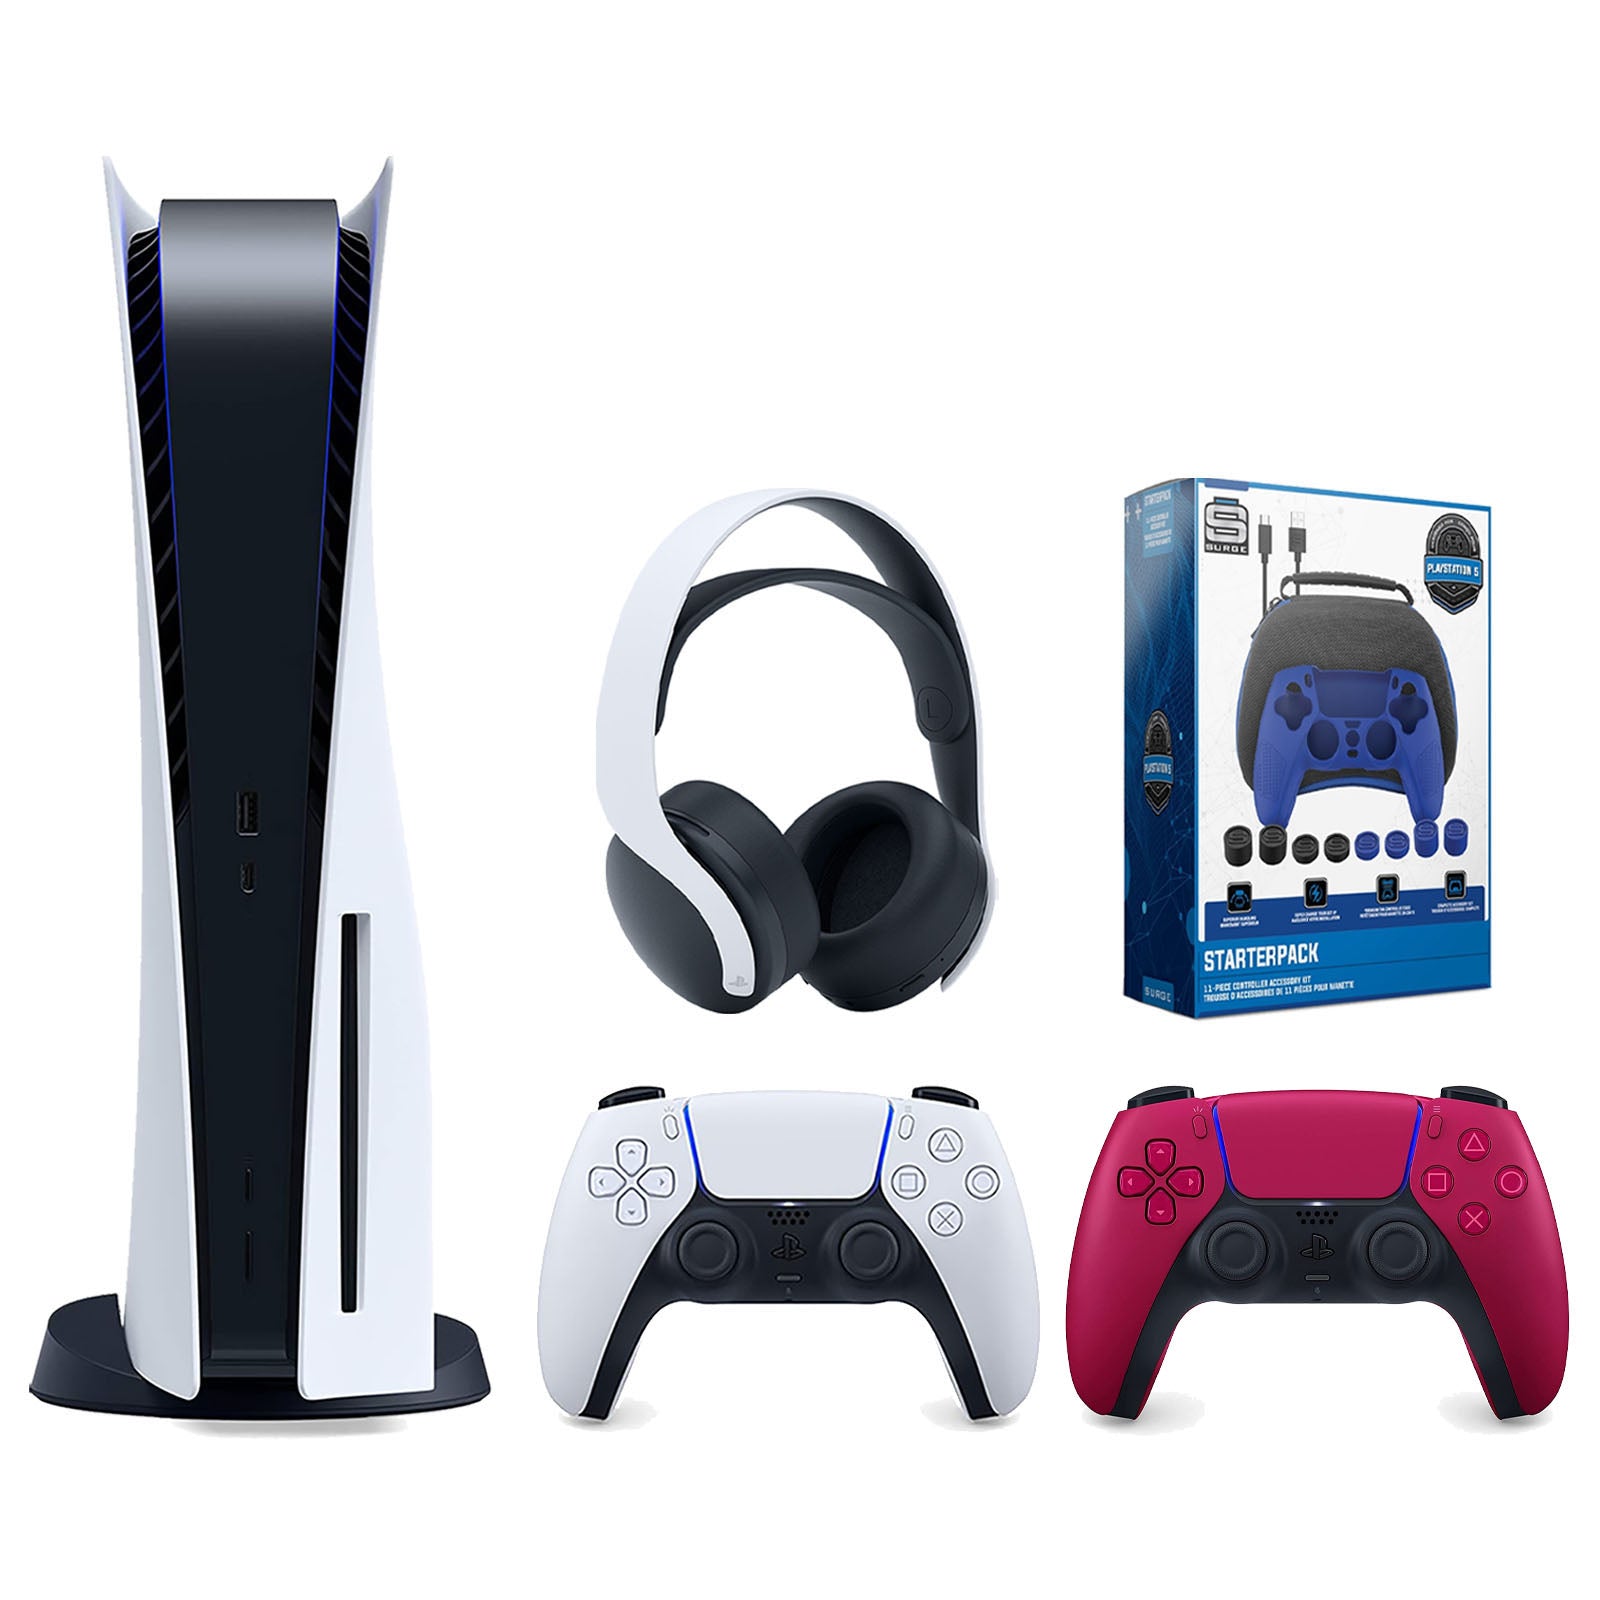 Sony Playstation 5 Disc Version Console with Extra Red Controller, White PULSE 3D Headset and Surge Pro Gamer Starter Pack 11-Piece Accessory Bundle - Pro-Distributing